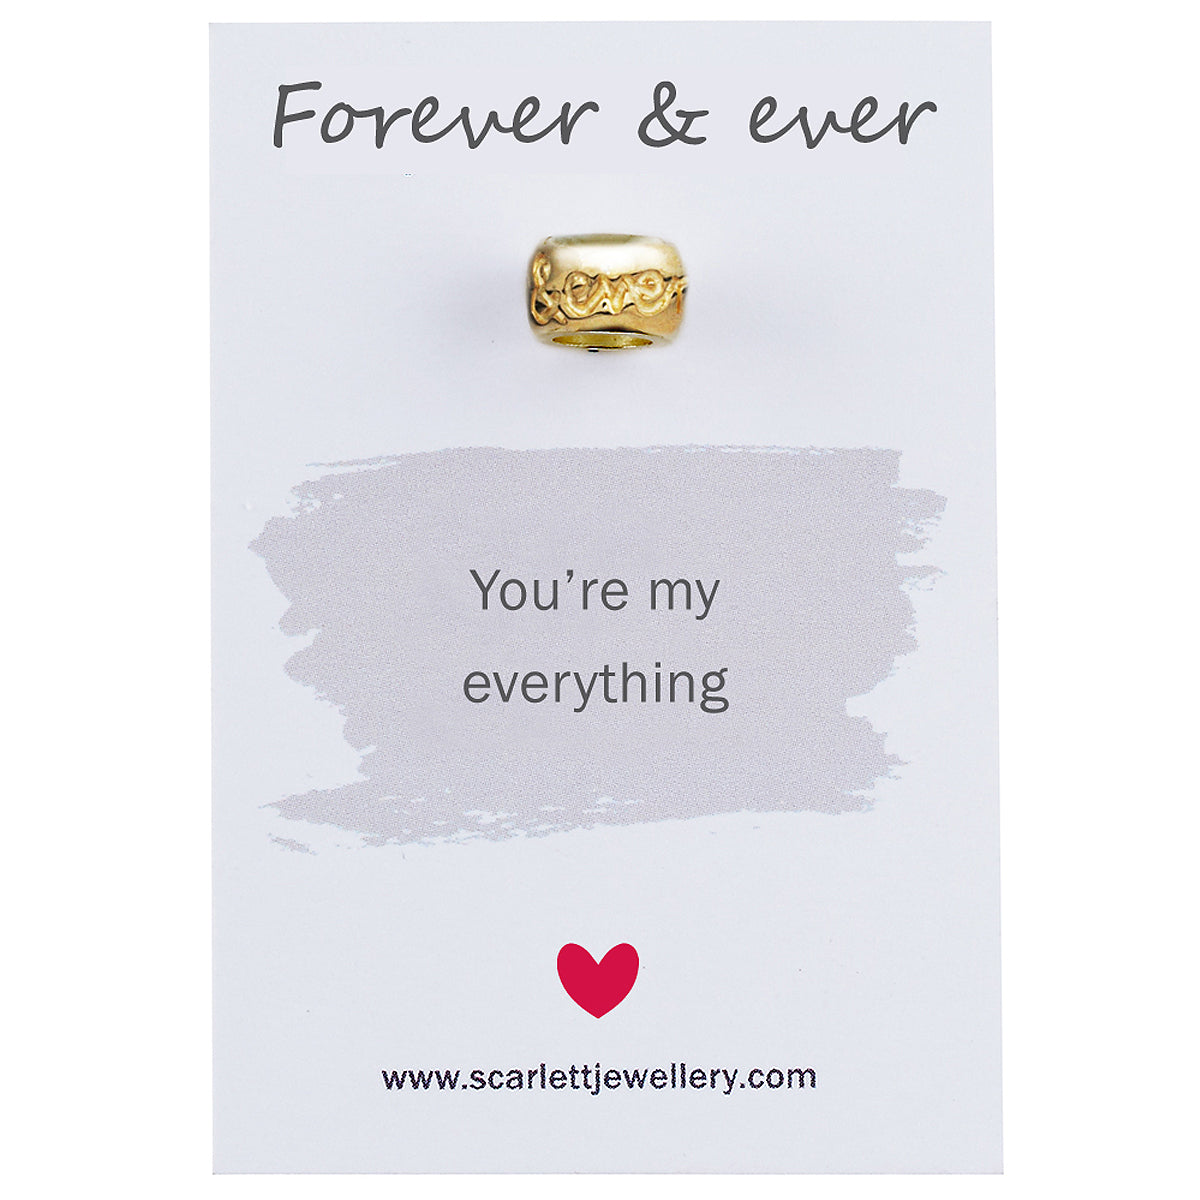 Forever and ever solid gold charm bead Scarlett Jewellery